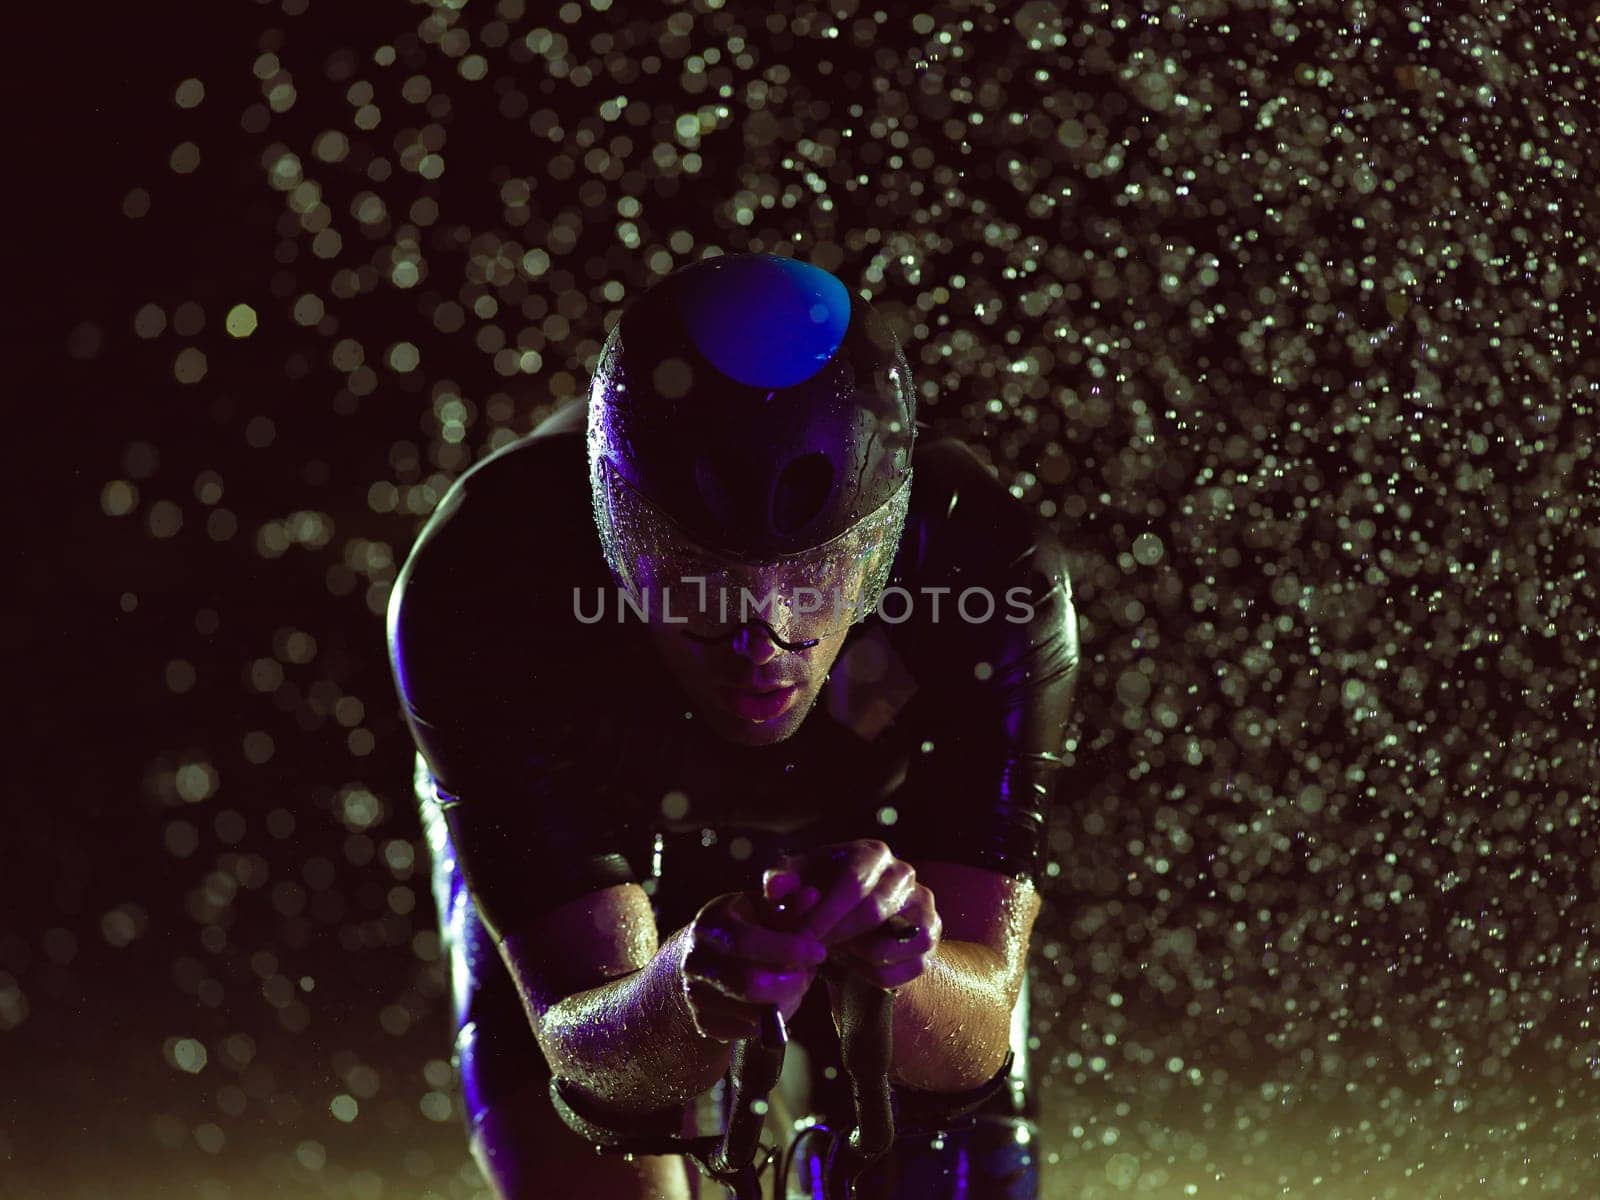 A triathlete braving the rain as he cycles through the night, preparing himself for the upcoming marathon by dotshock